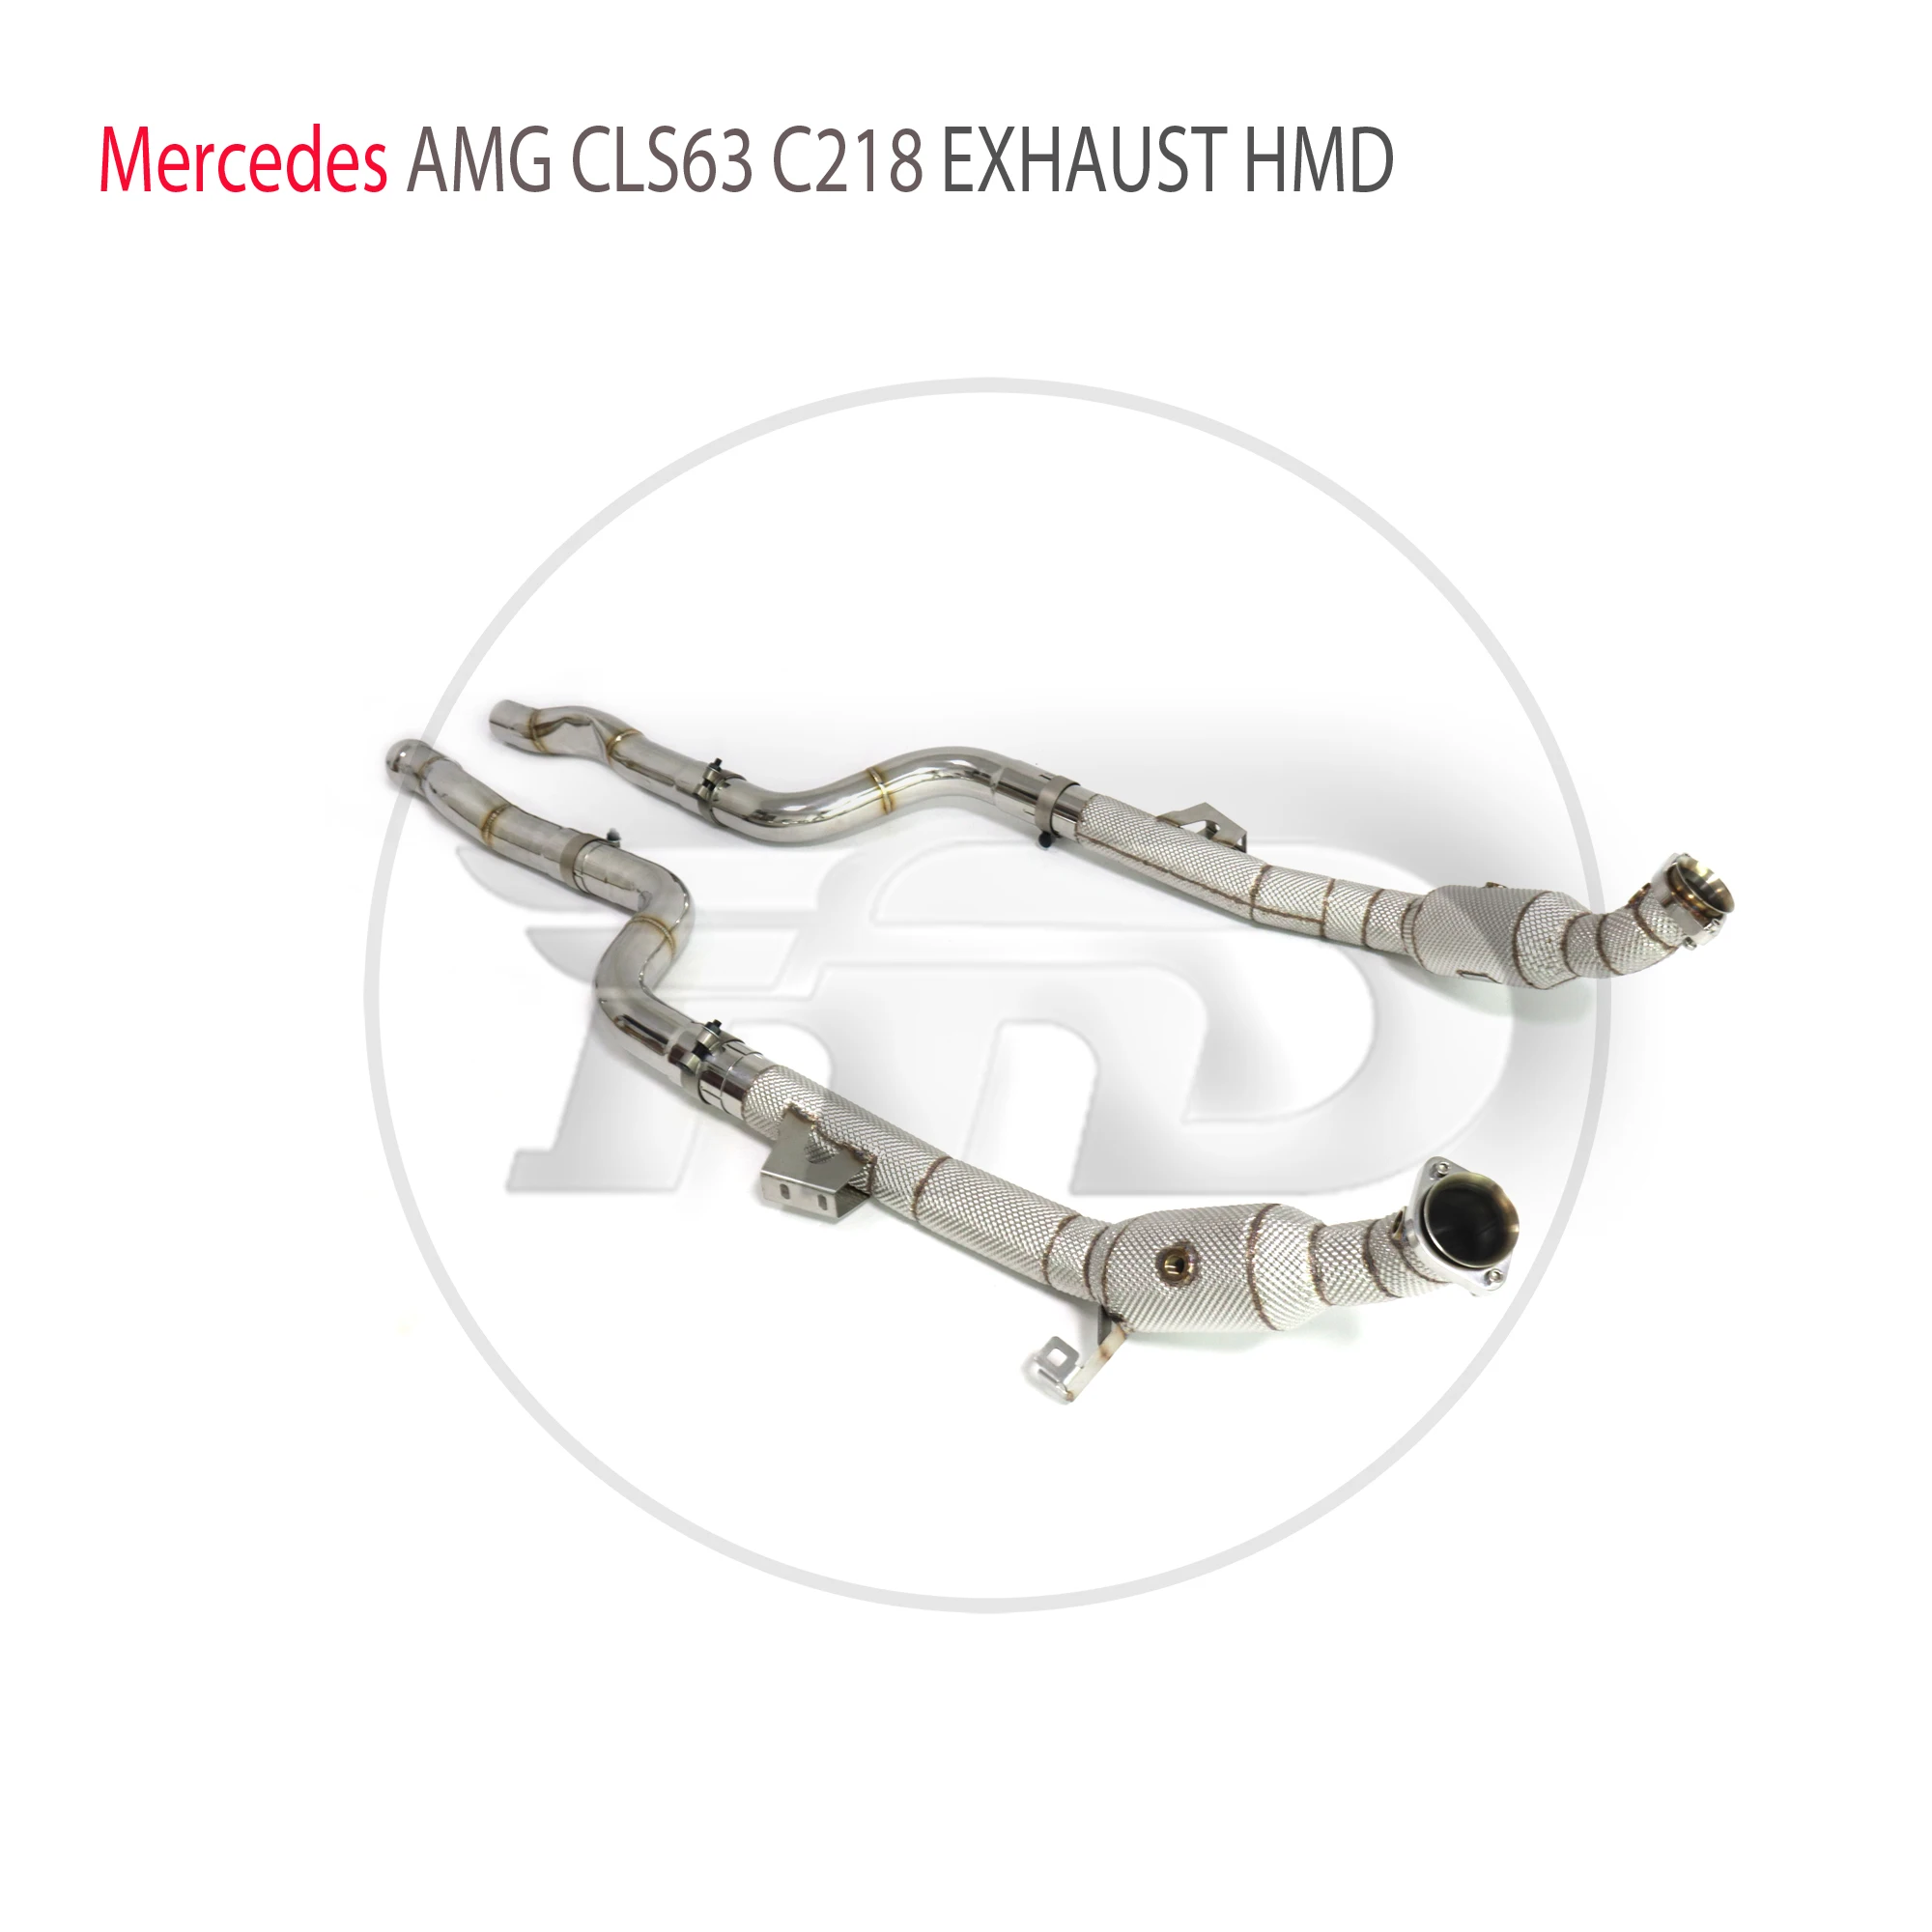 

HMD Exhaust System High Flow Performance Downpipe for Mercedes Benz AMG CLS63 C218 Car Accessories With Catalytic Header